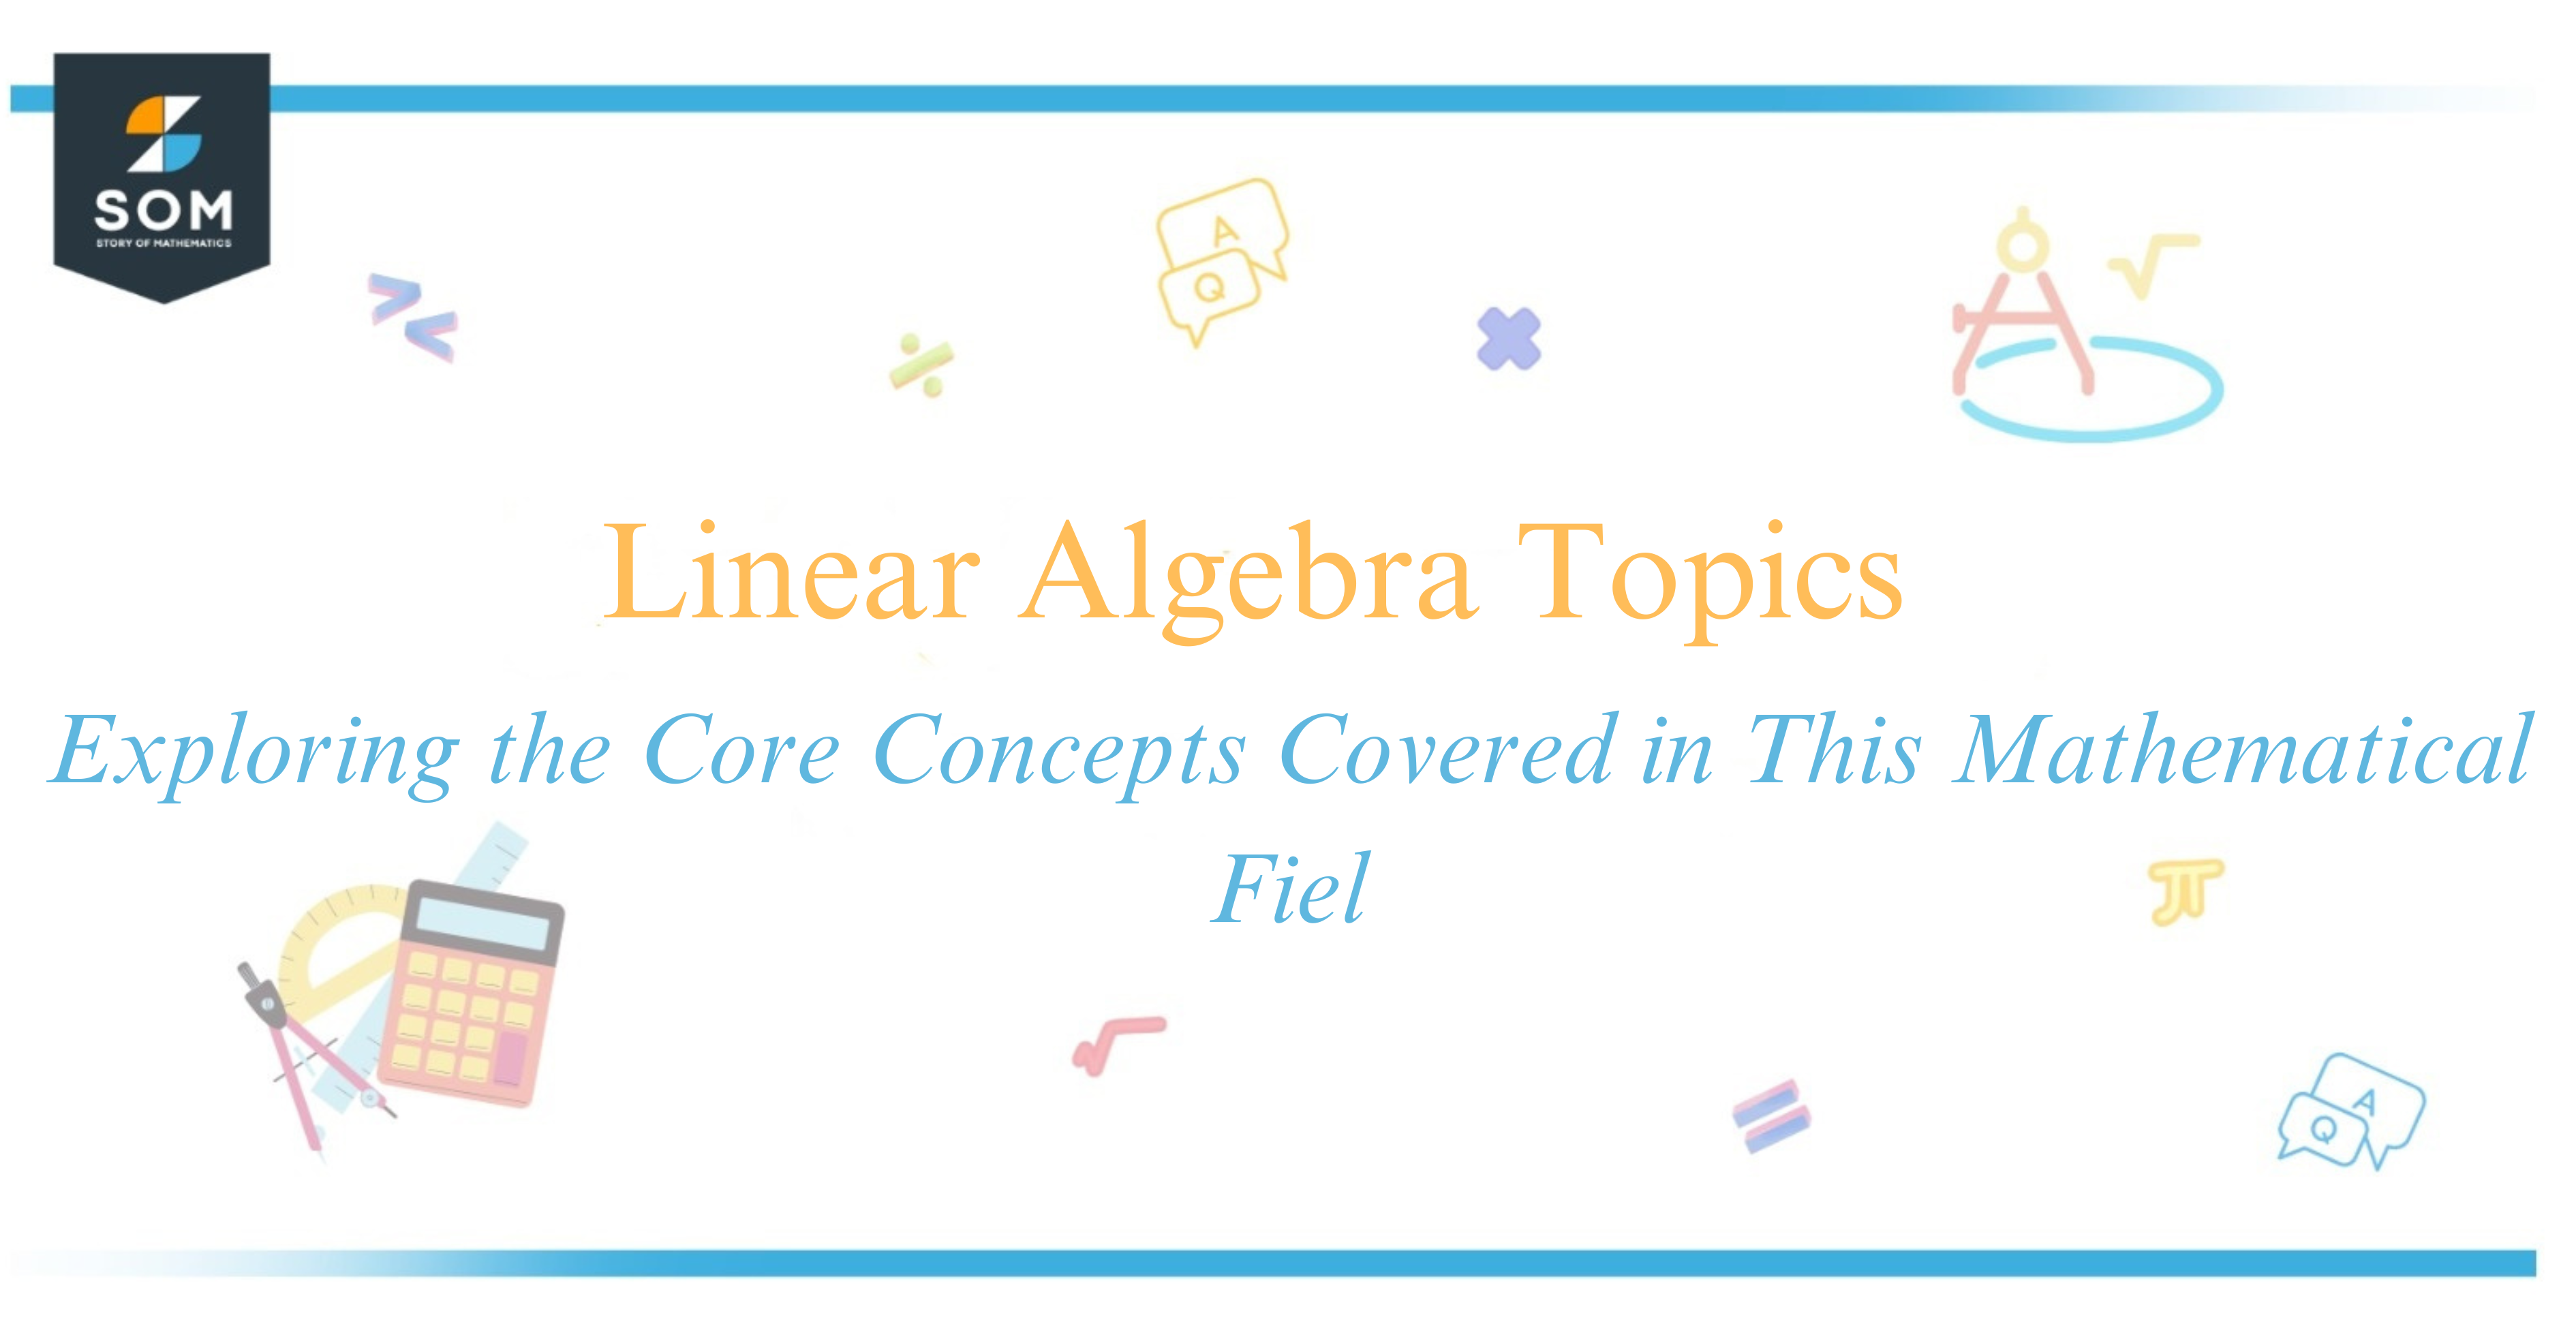 Linear Algebra Topics Exploring the Core Concepts Covered in This Mathematical Fiel